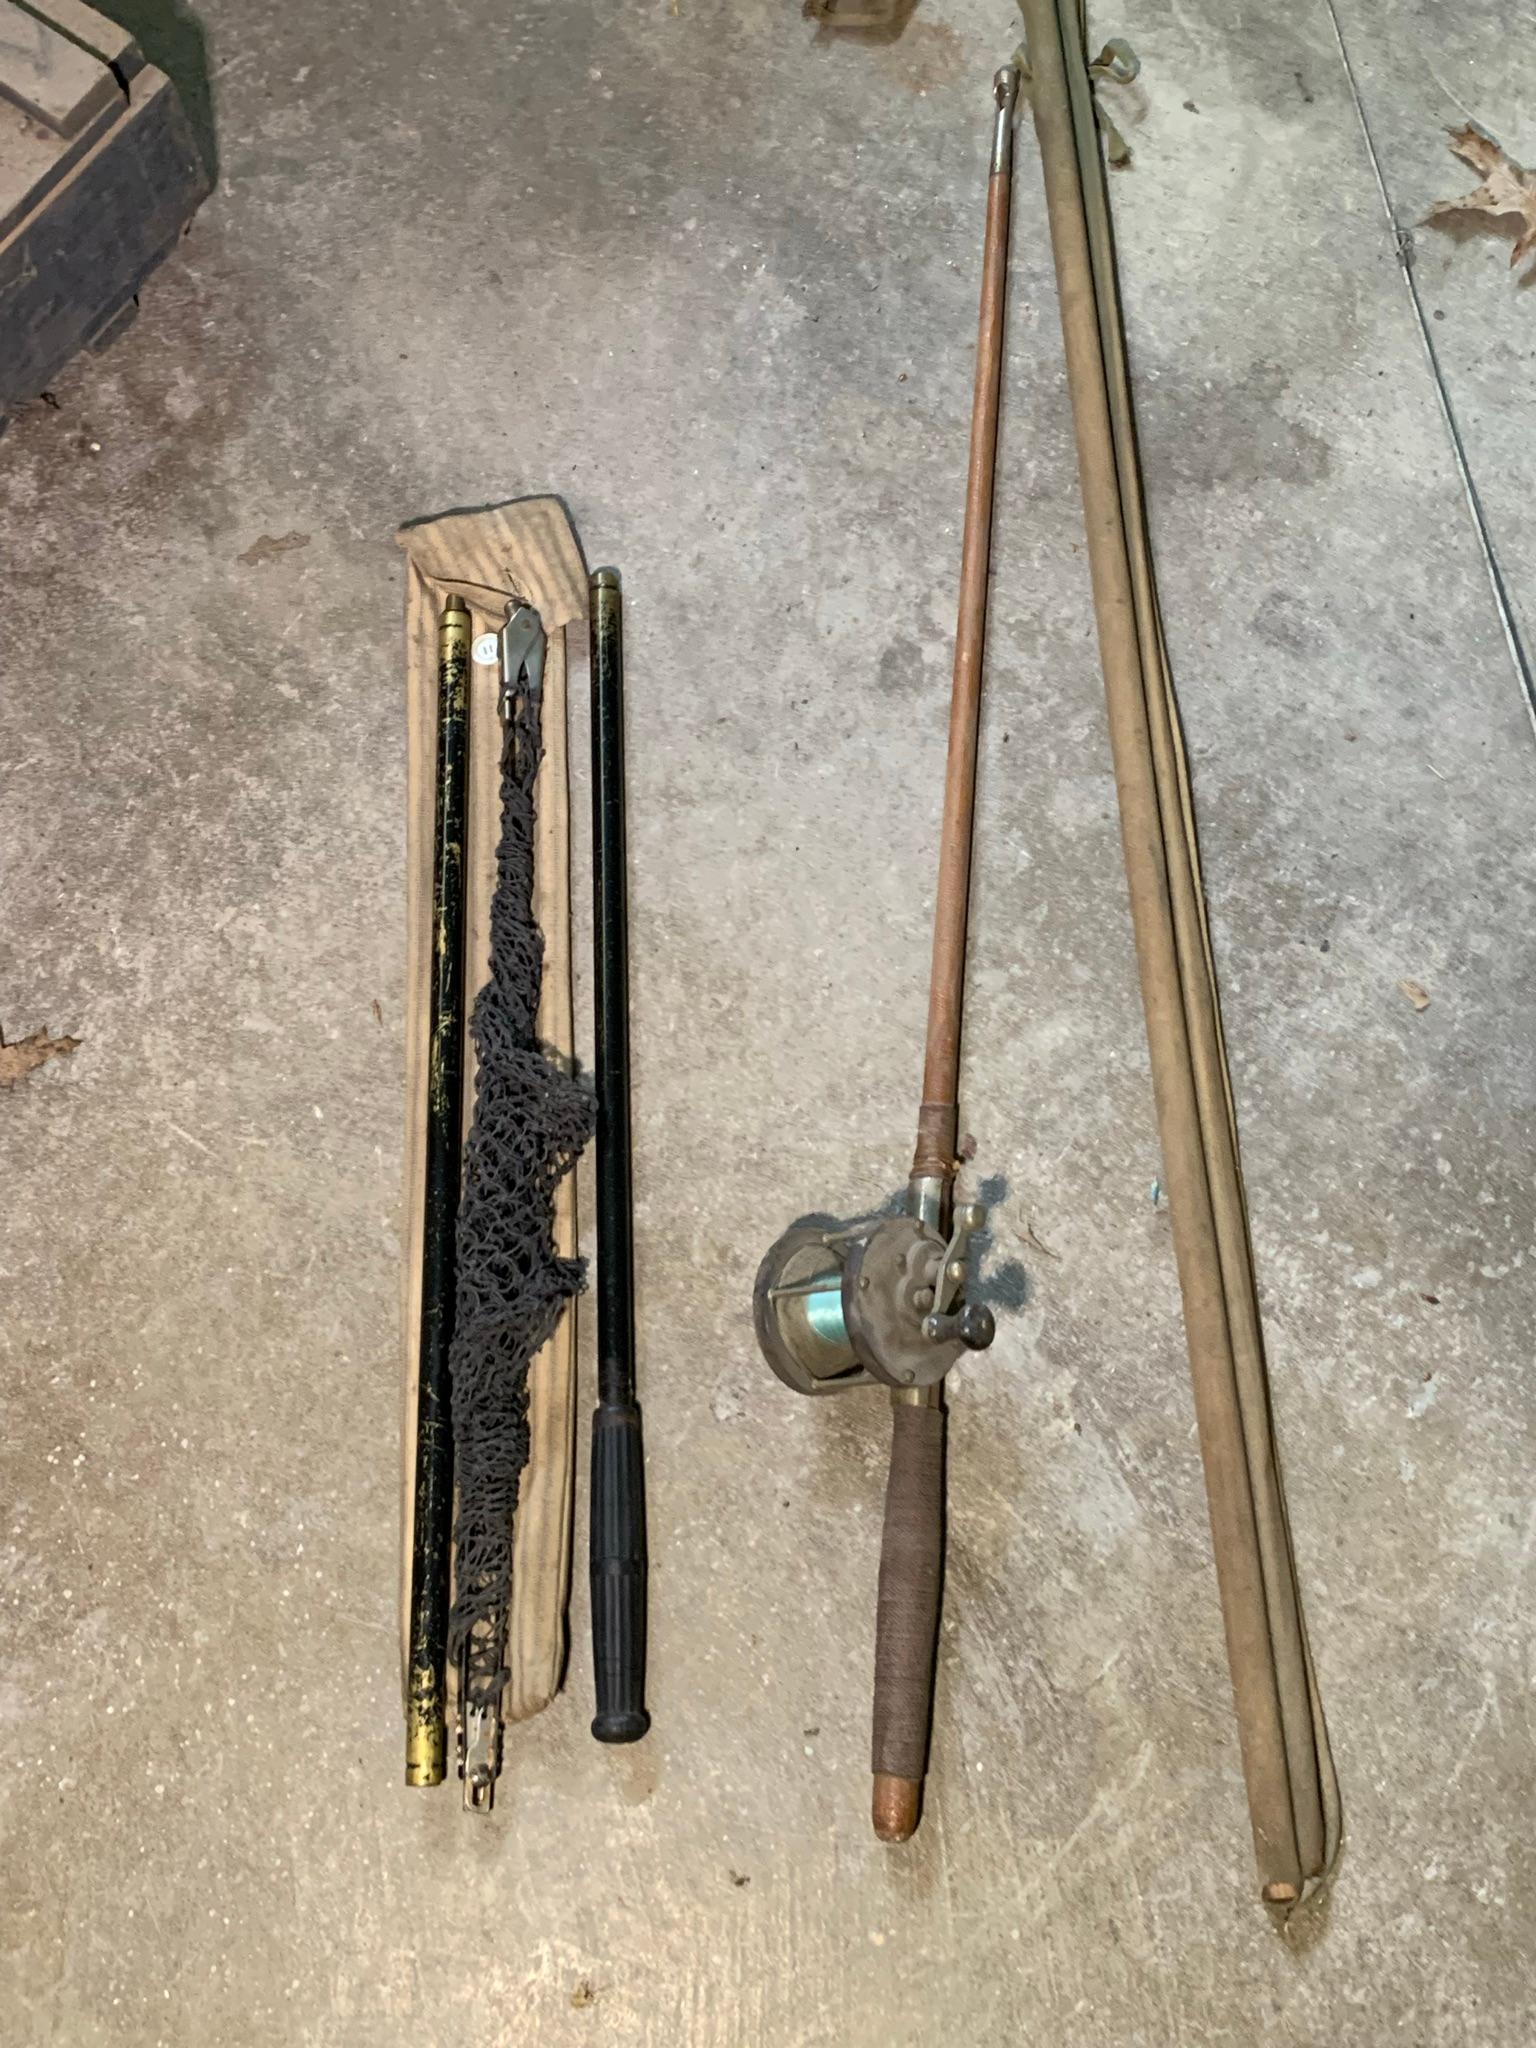 Great Group of Vintage Fishing Pools and Wooden Ammo Crate